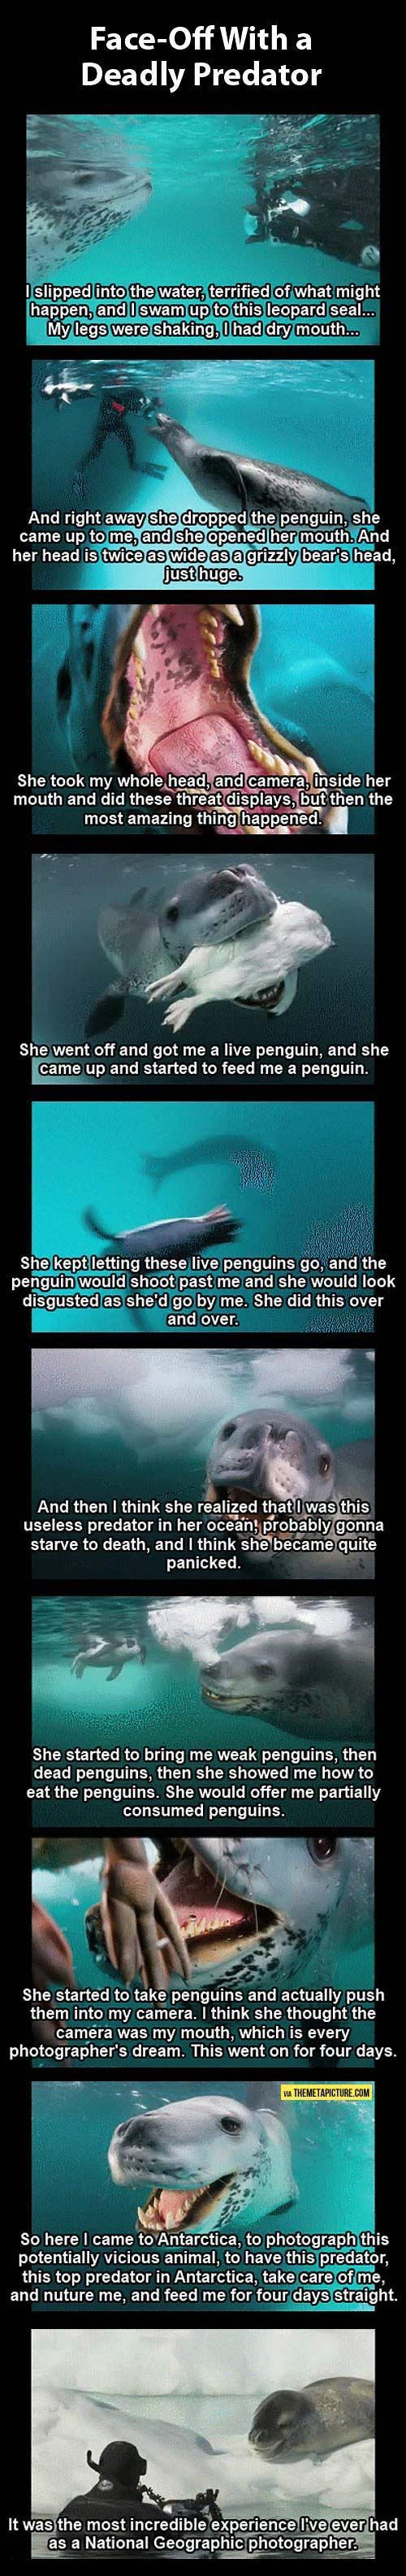 That poor seal was afraid his new friend was too stupid to live!